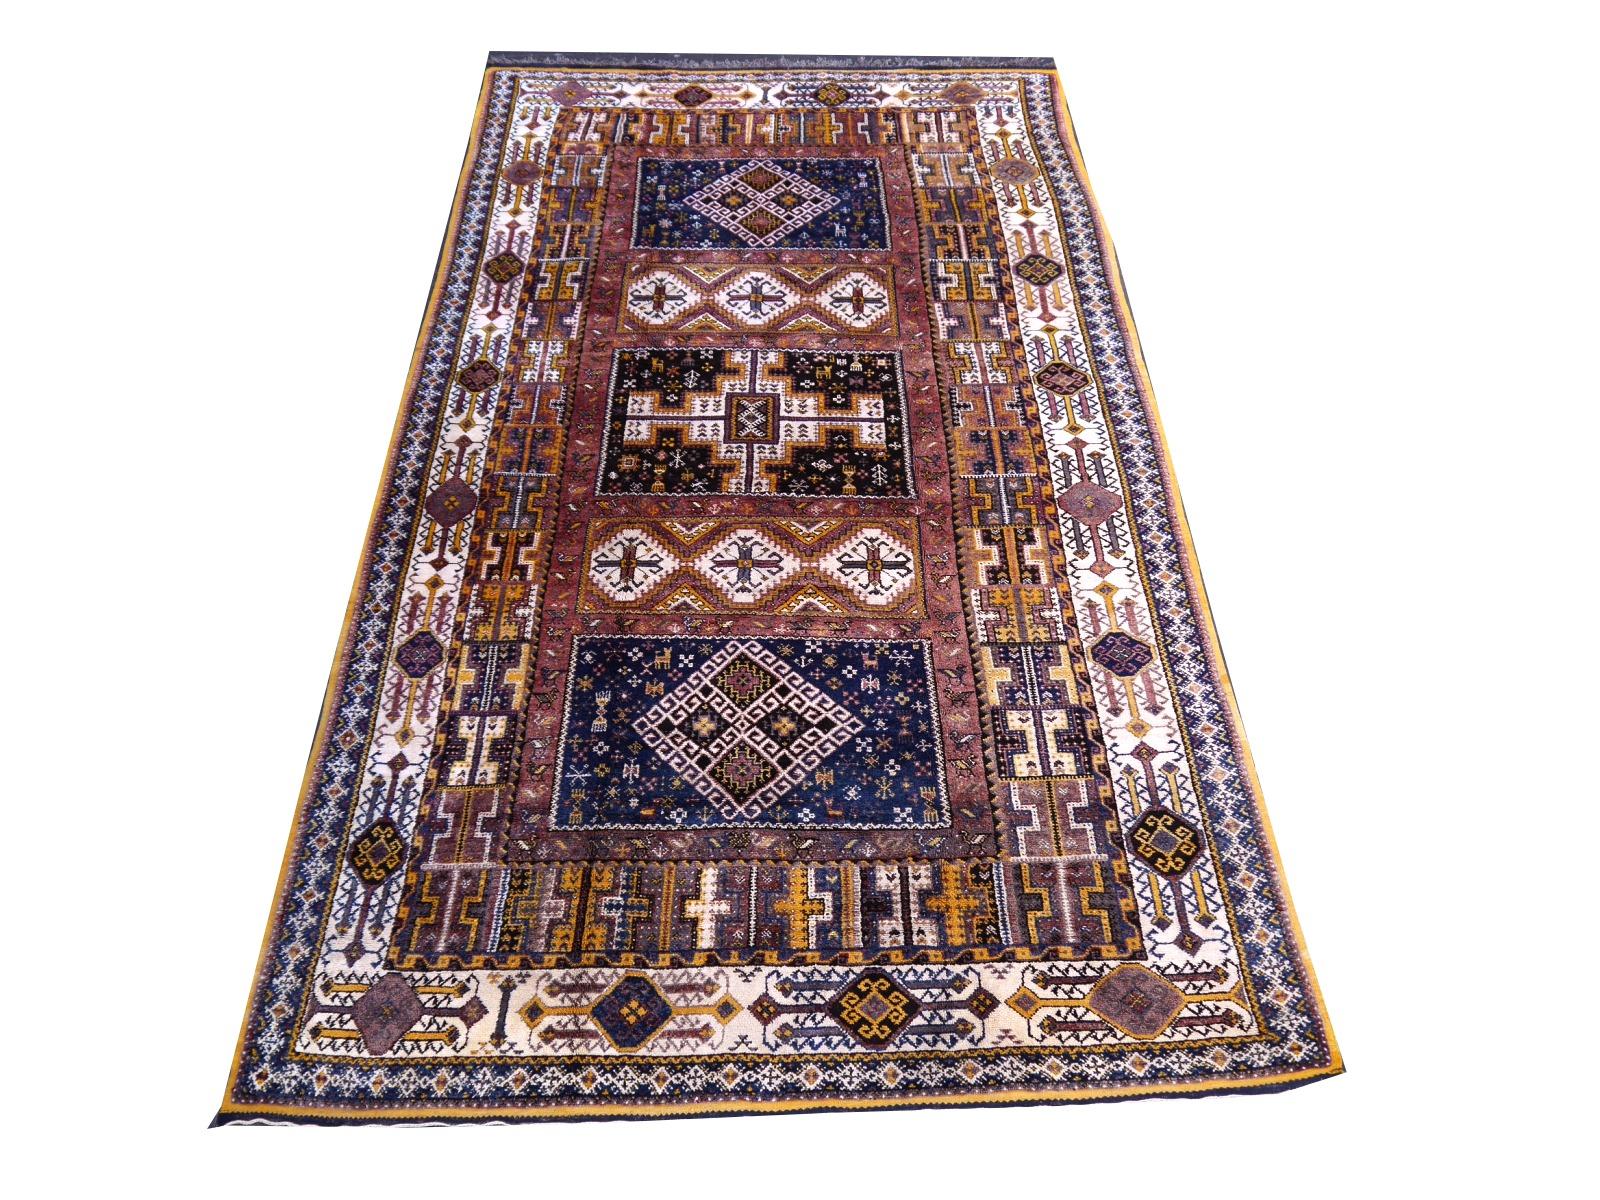 Berber rugs and carpets are mainly made in Morocco, Tunesia and Algeria. Largest producer are the tribal and nomadic Berber people of Morocco. Different areas produce very beautiful works of art. 

This rug was made in a village in the Atlas